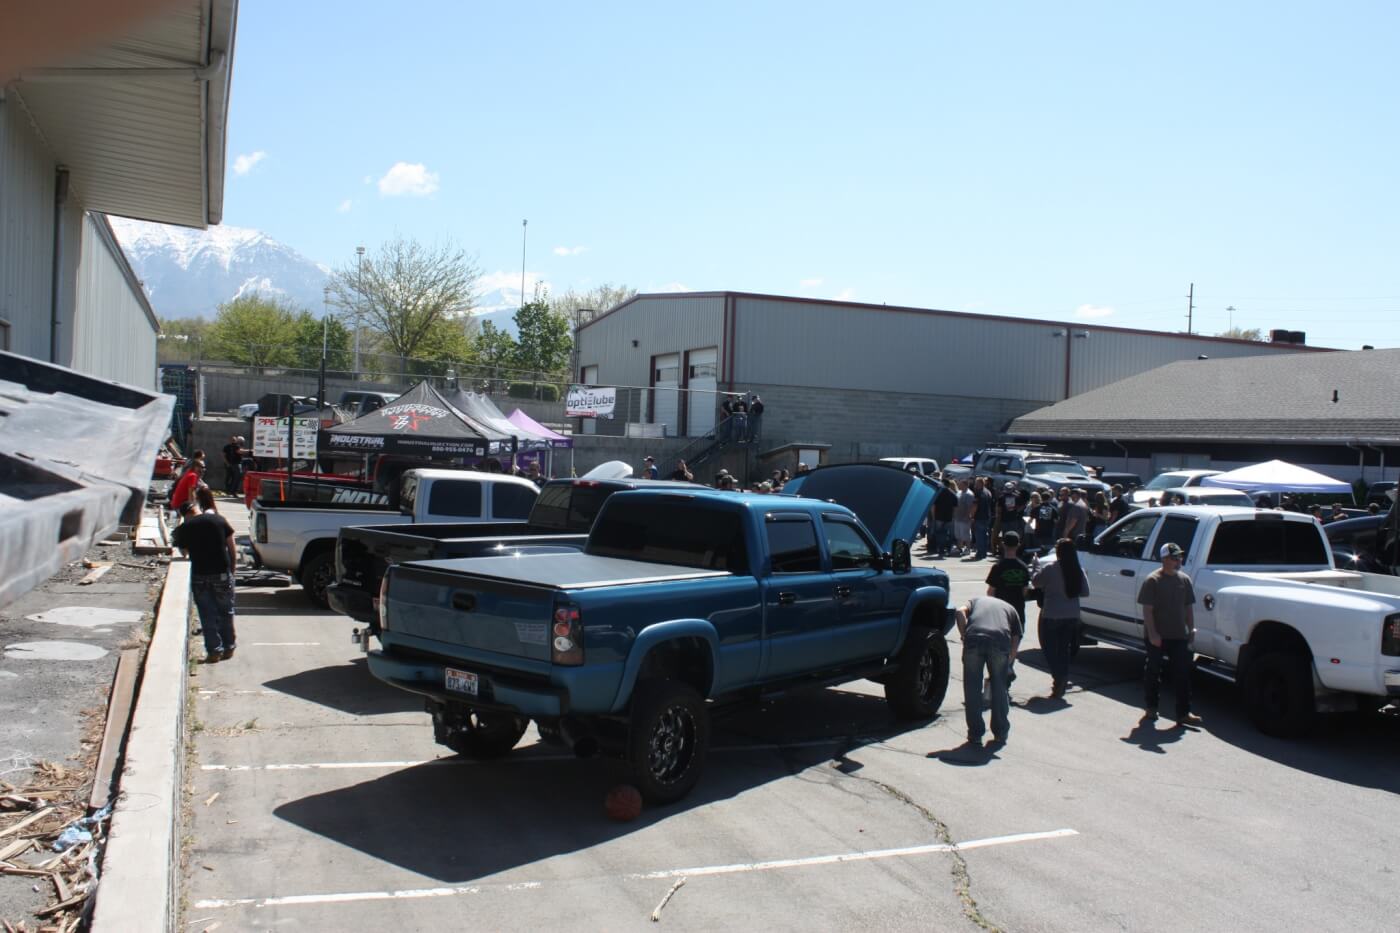 Nestled into a small industrial business park just off the I-15 corridor in Orem, UT, the No Zone Diesel shop is owned and run by Dmitri Millard, a name that should be pretty familiar with anyone that follows the high performance diesel market. Millard has been pushing the limits of Duramax performance for years now and has most recently branched out into building competition Allison transmissions for Duramax owners all over the country.